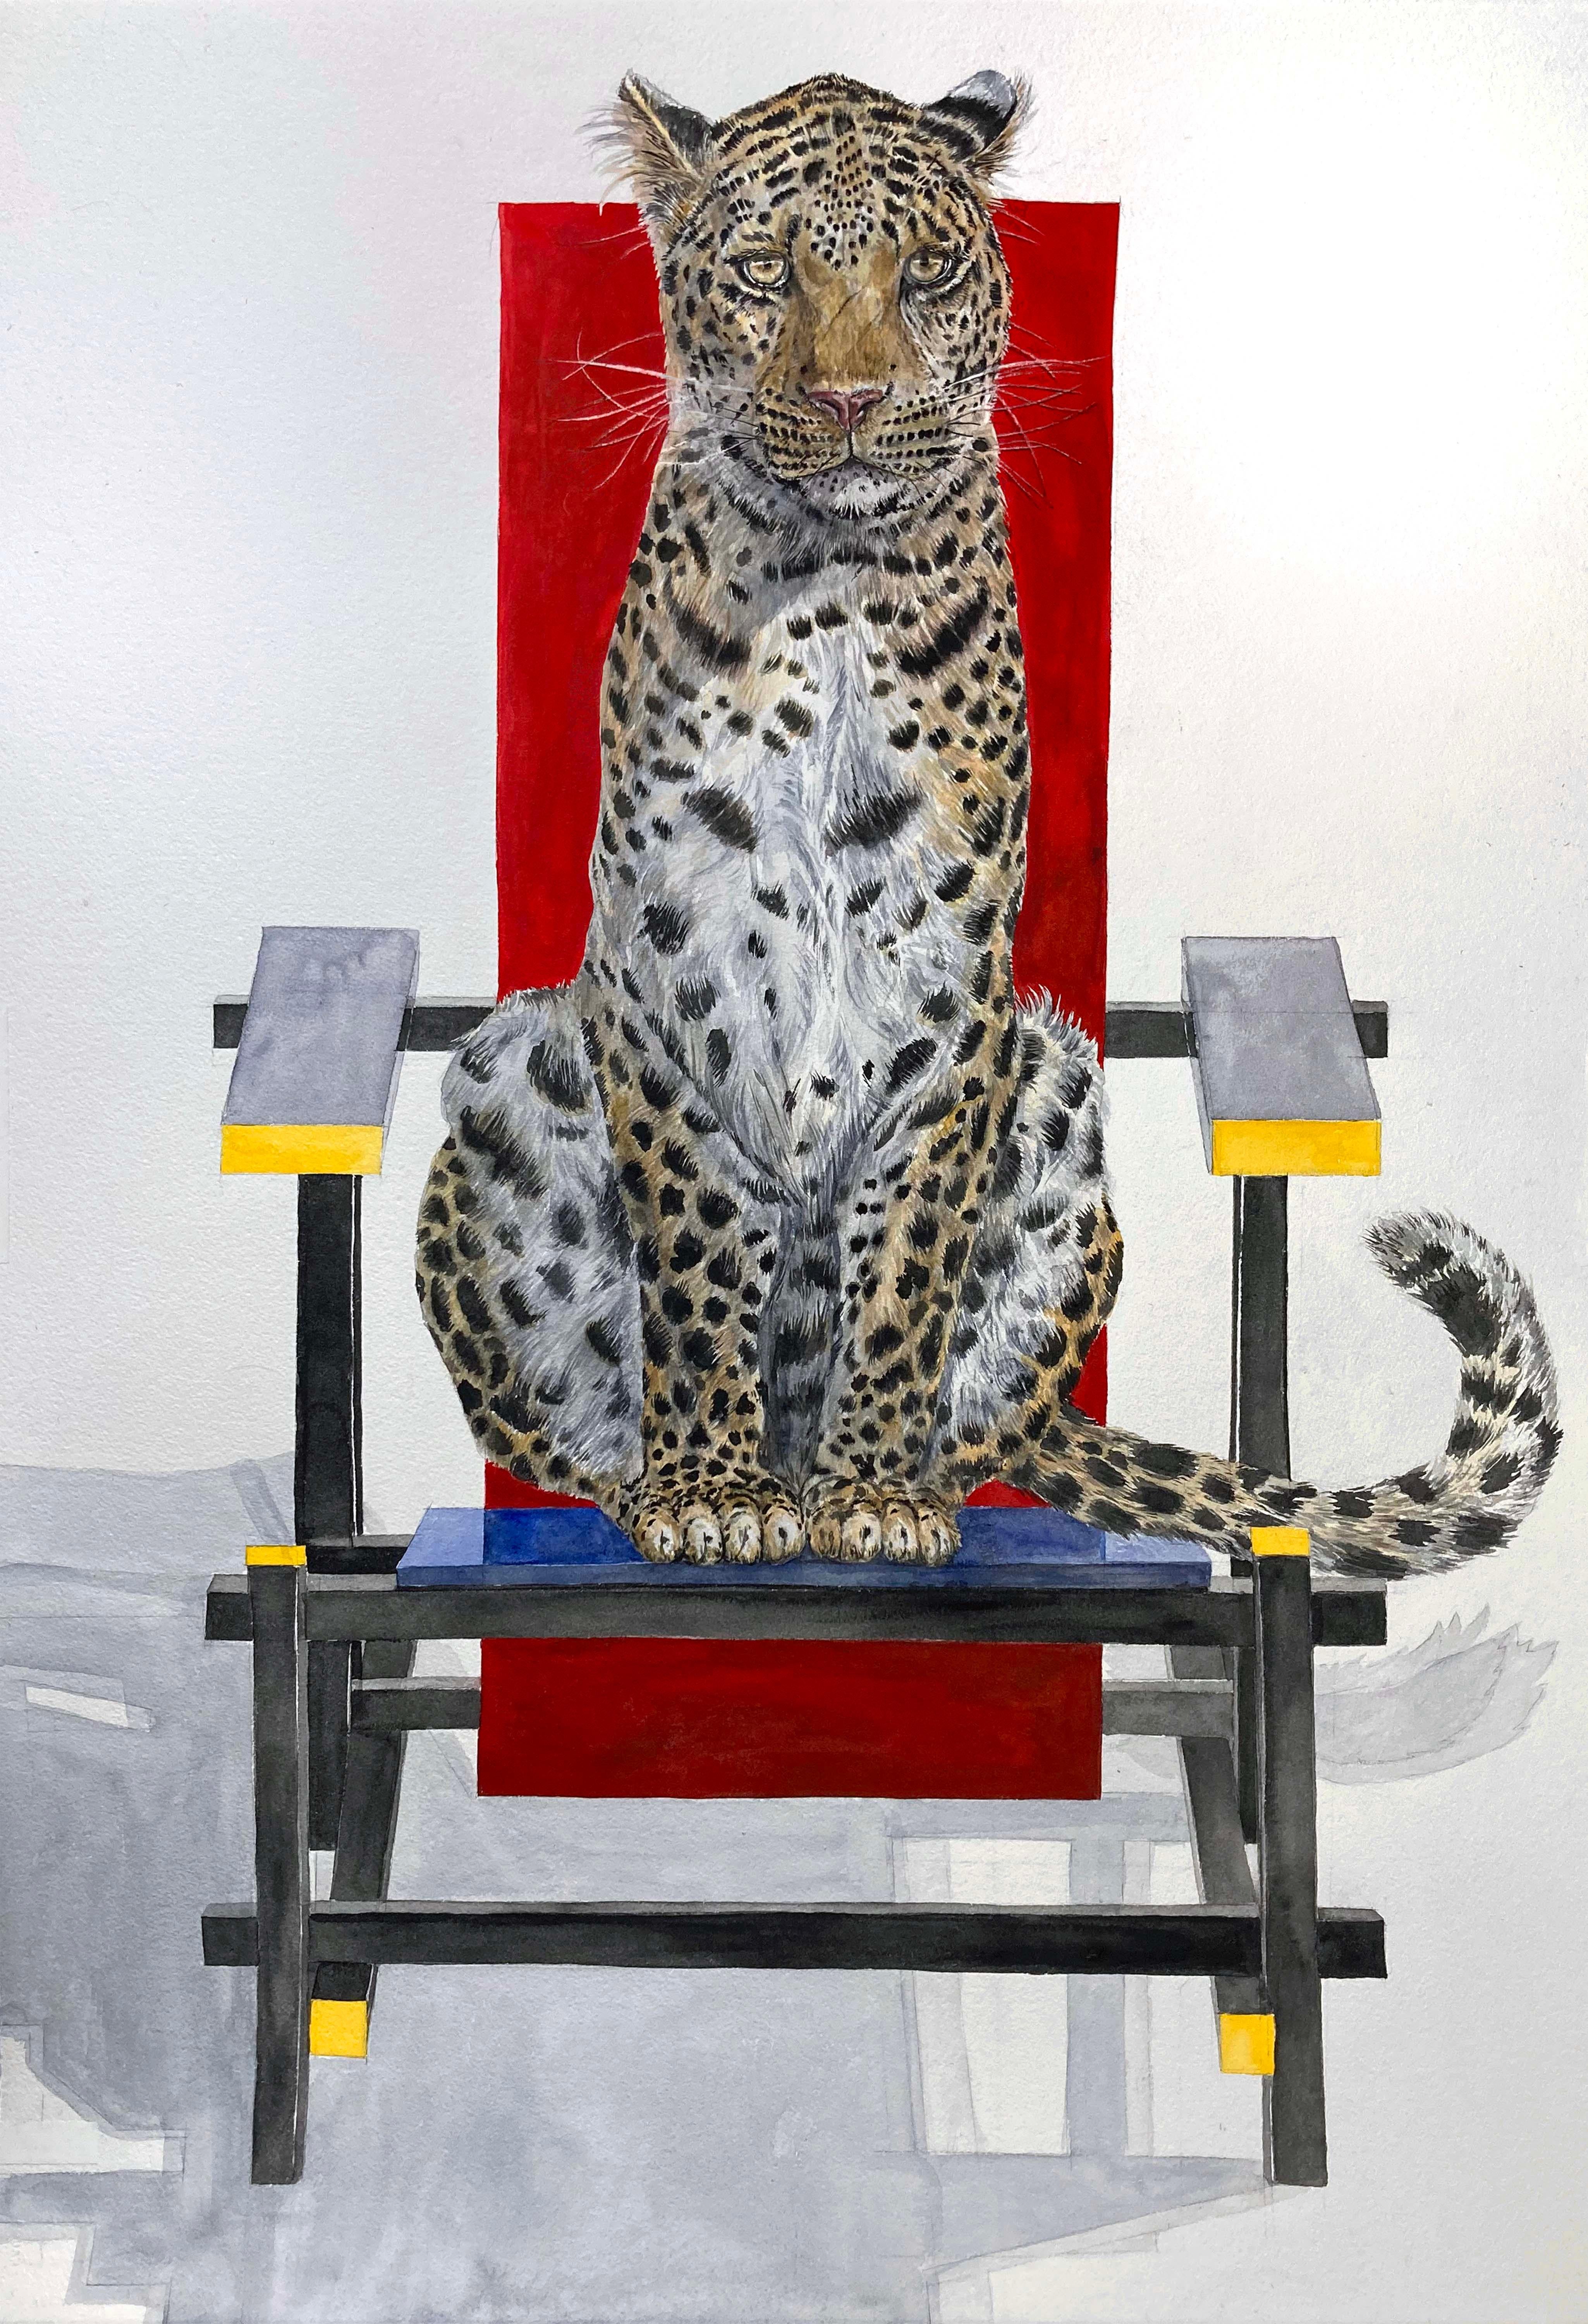 Thomas Broadbent Animal Painting - "Leopard on Rietveld Chair" framed contemporary surrealist watercolor painting